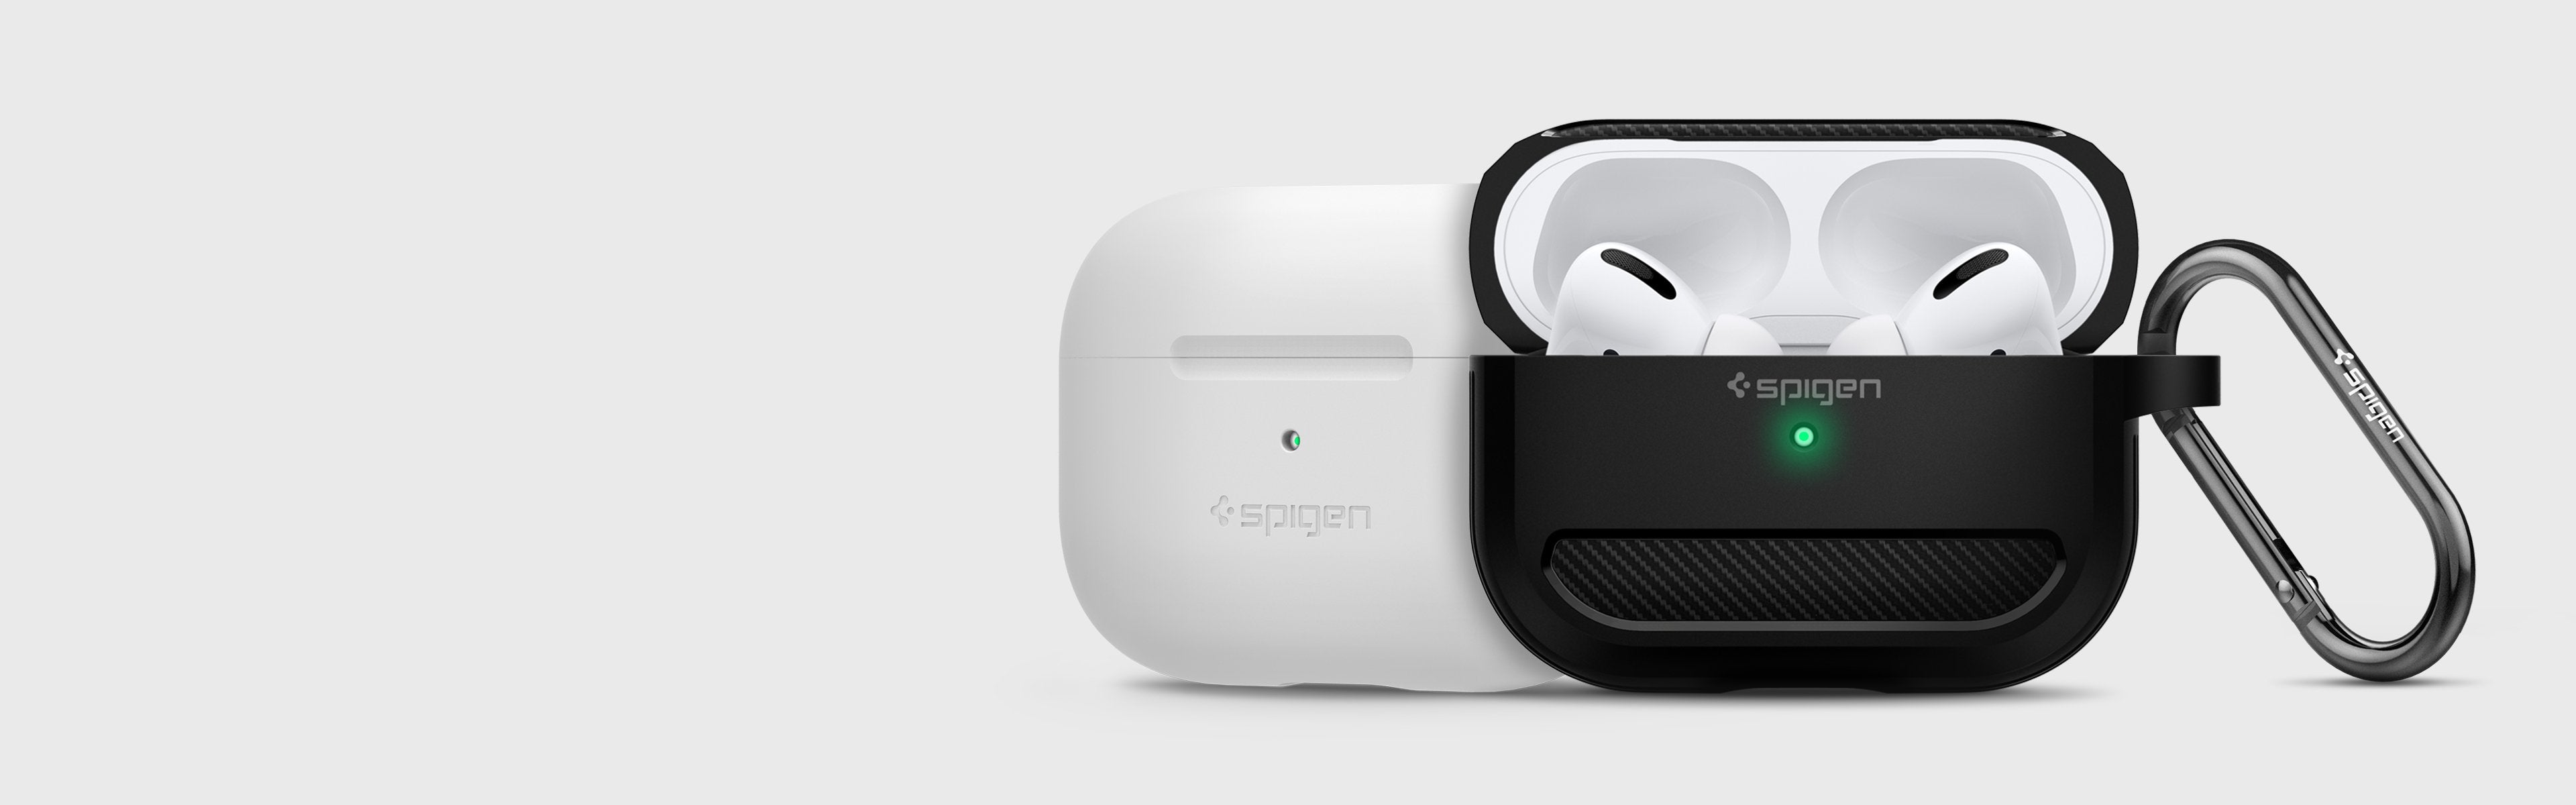 Spigen Cases And Accessory for Apple AirPods Pro